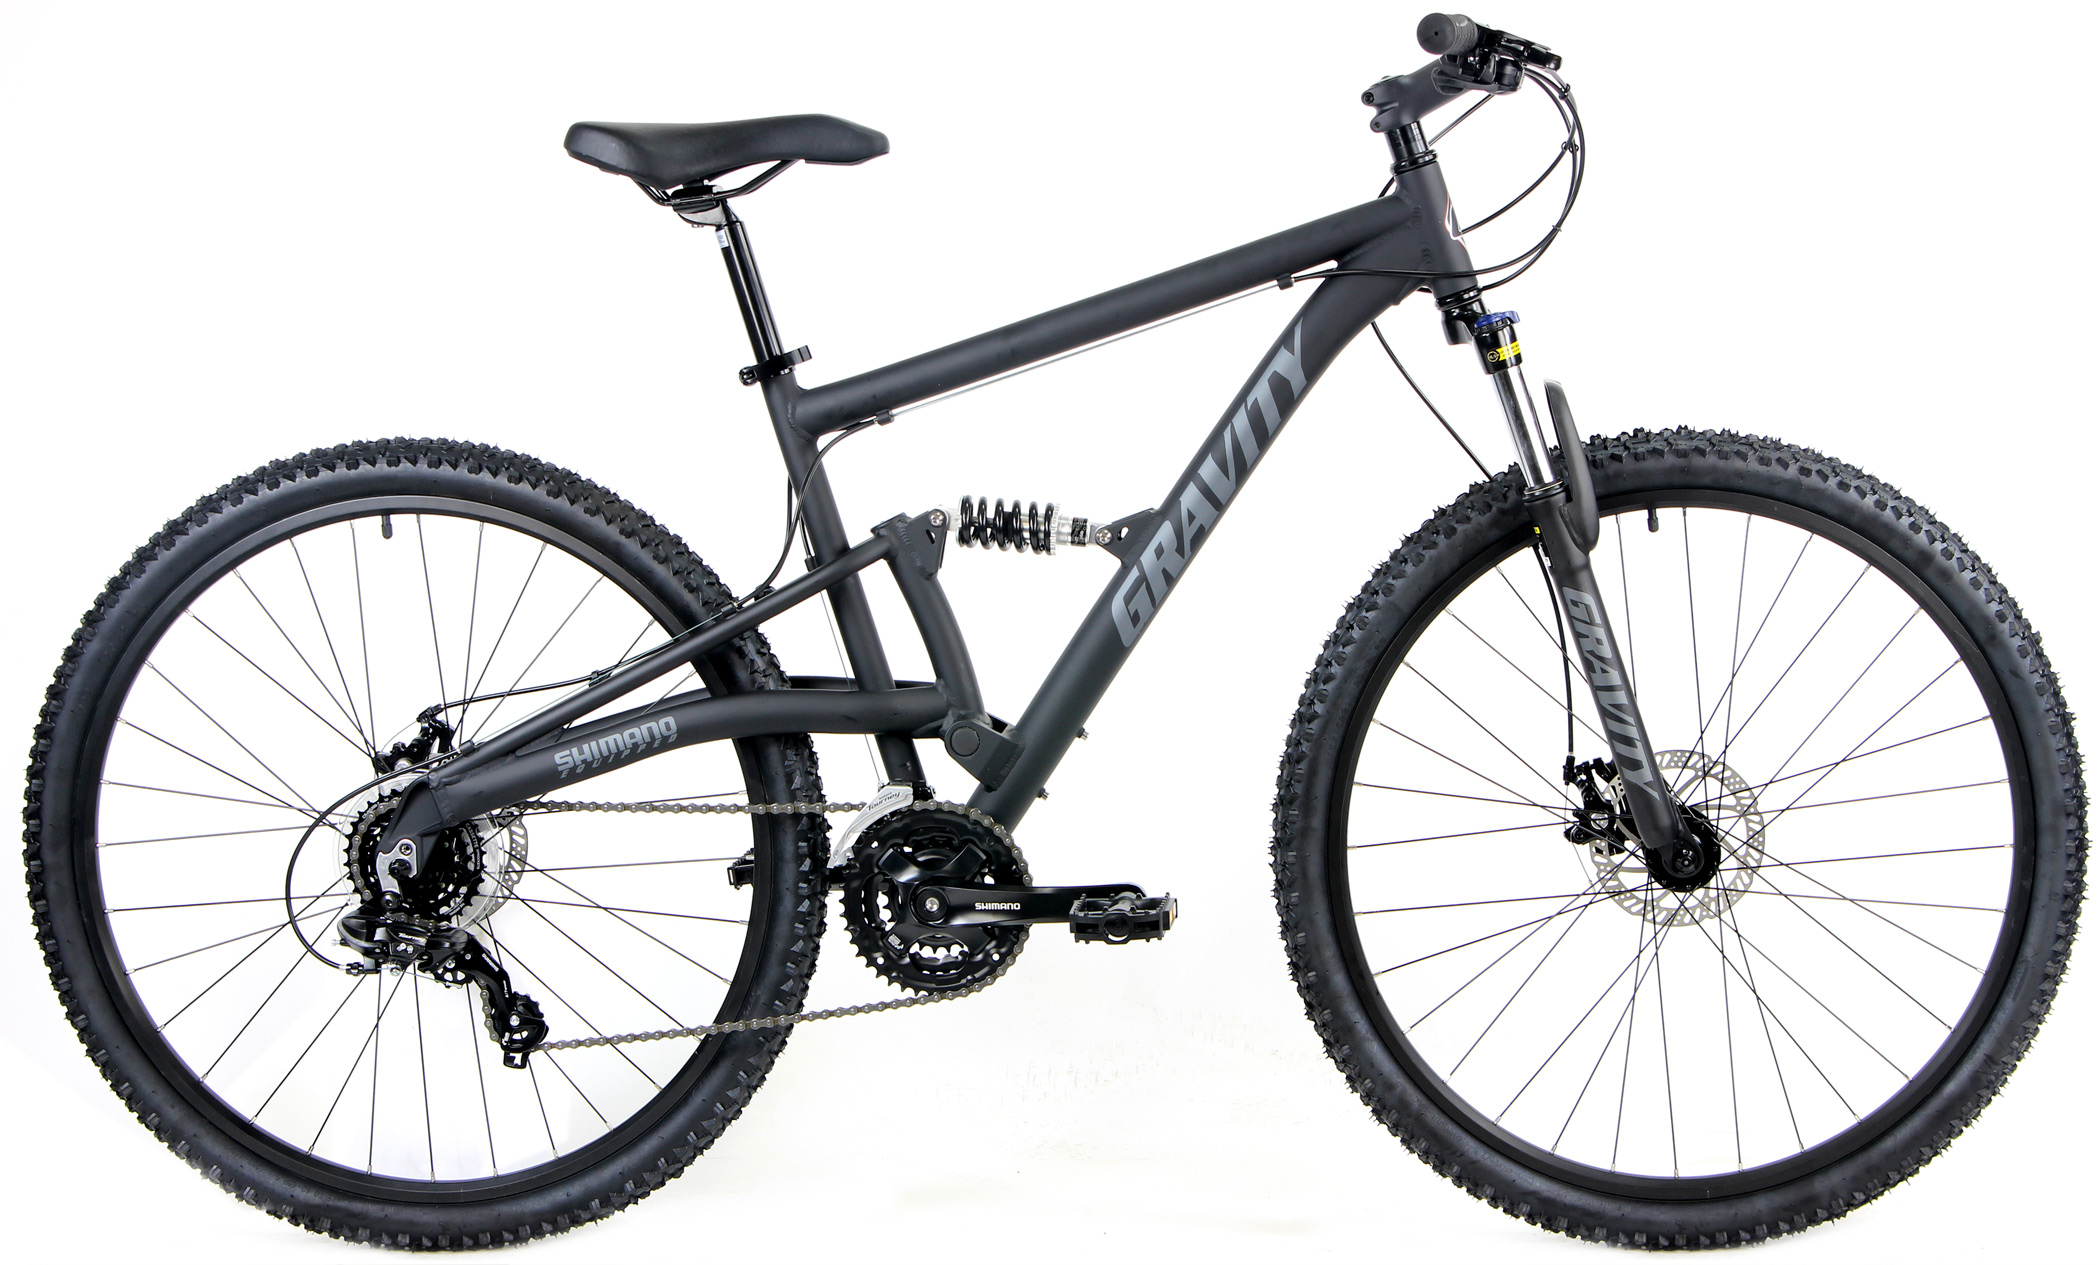 Save up to 60% off new 29er Mountain Bikes - MTB - Gravity Shimano Full ...